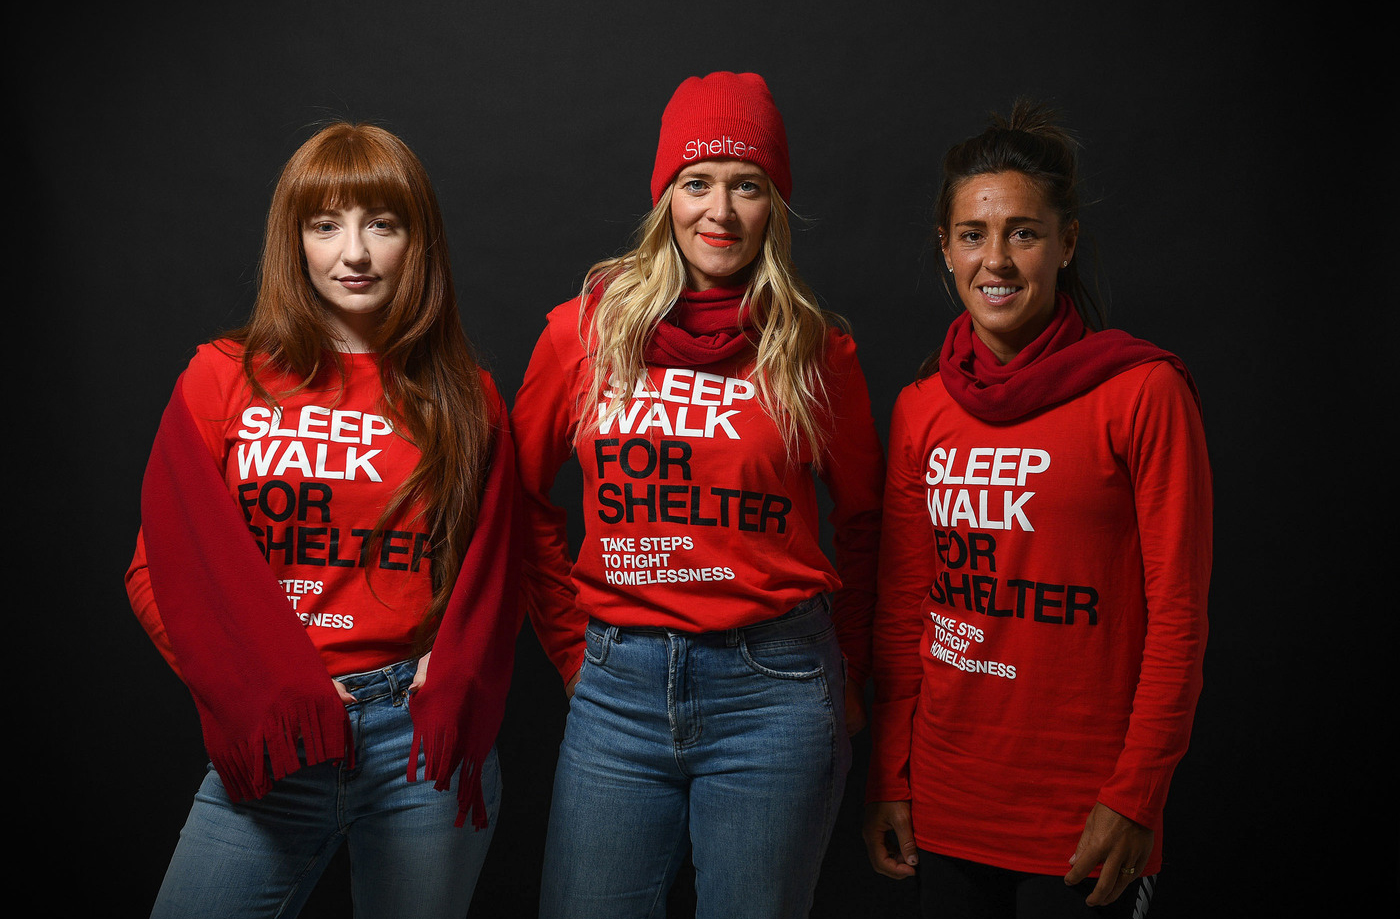 Edith Bowman, singer Nicola Roberts and England’s most capped Lioness Fara Williams